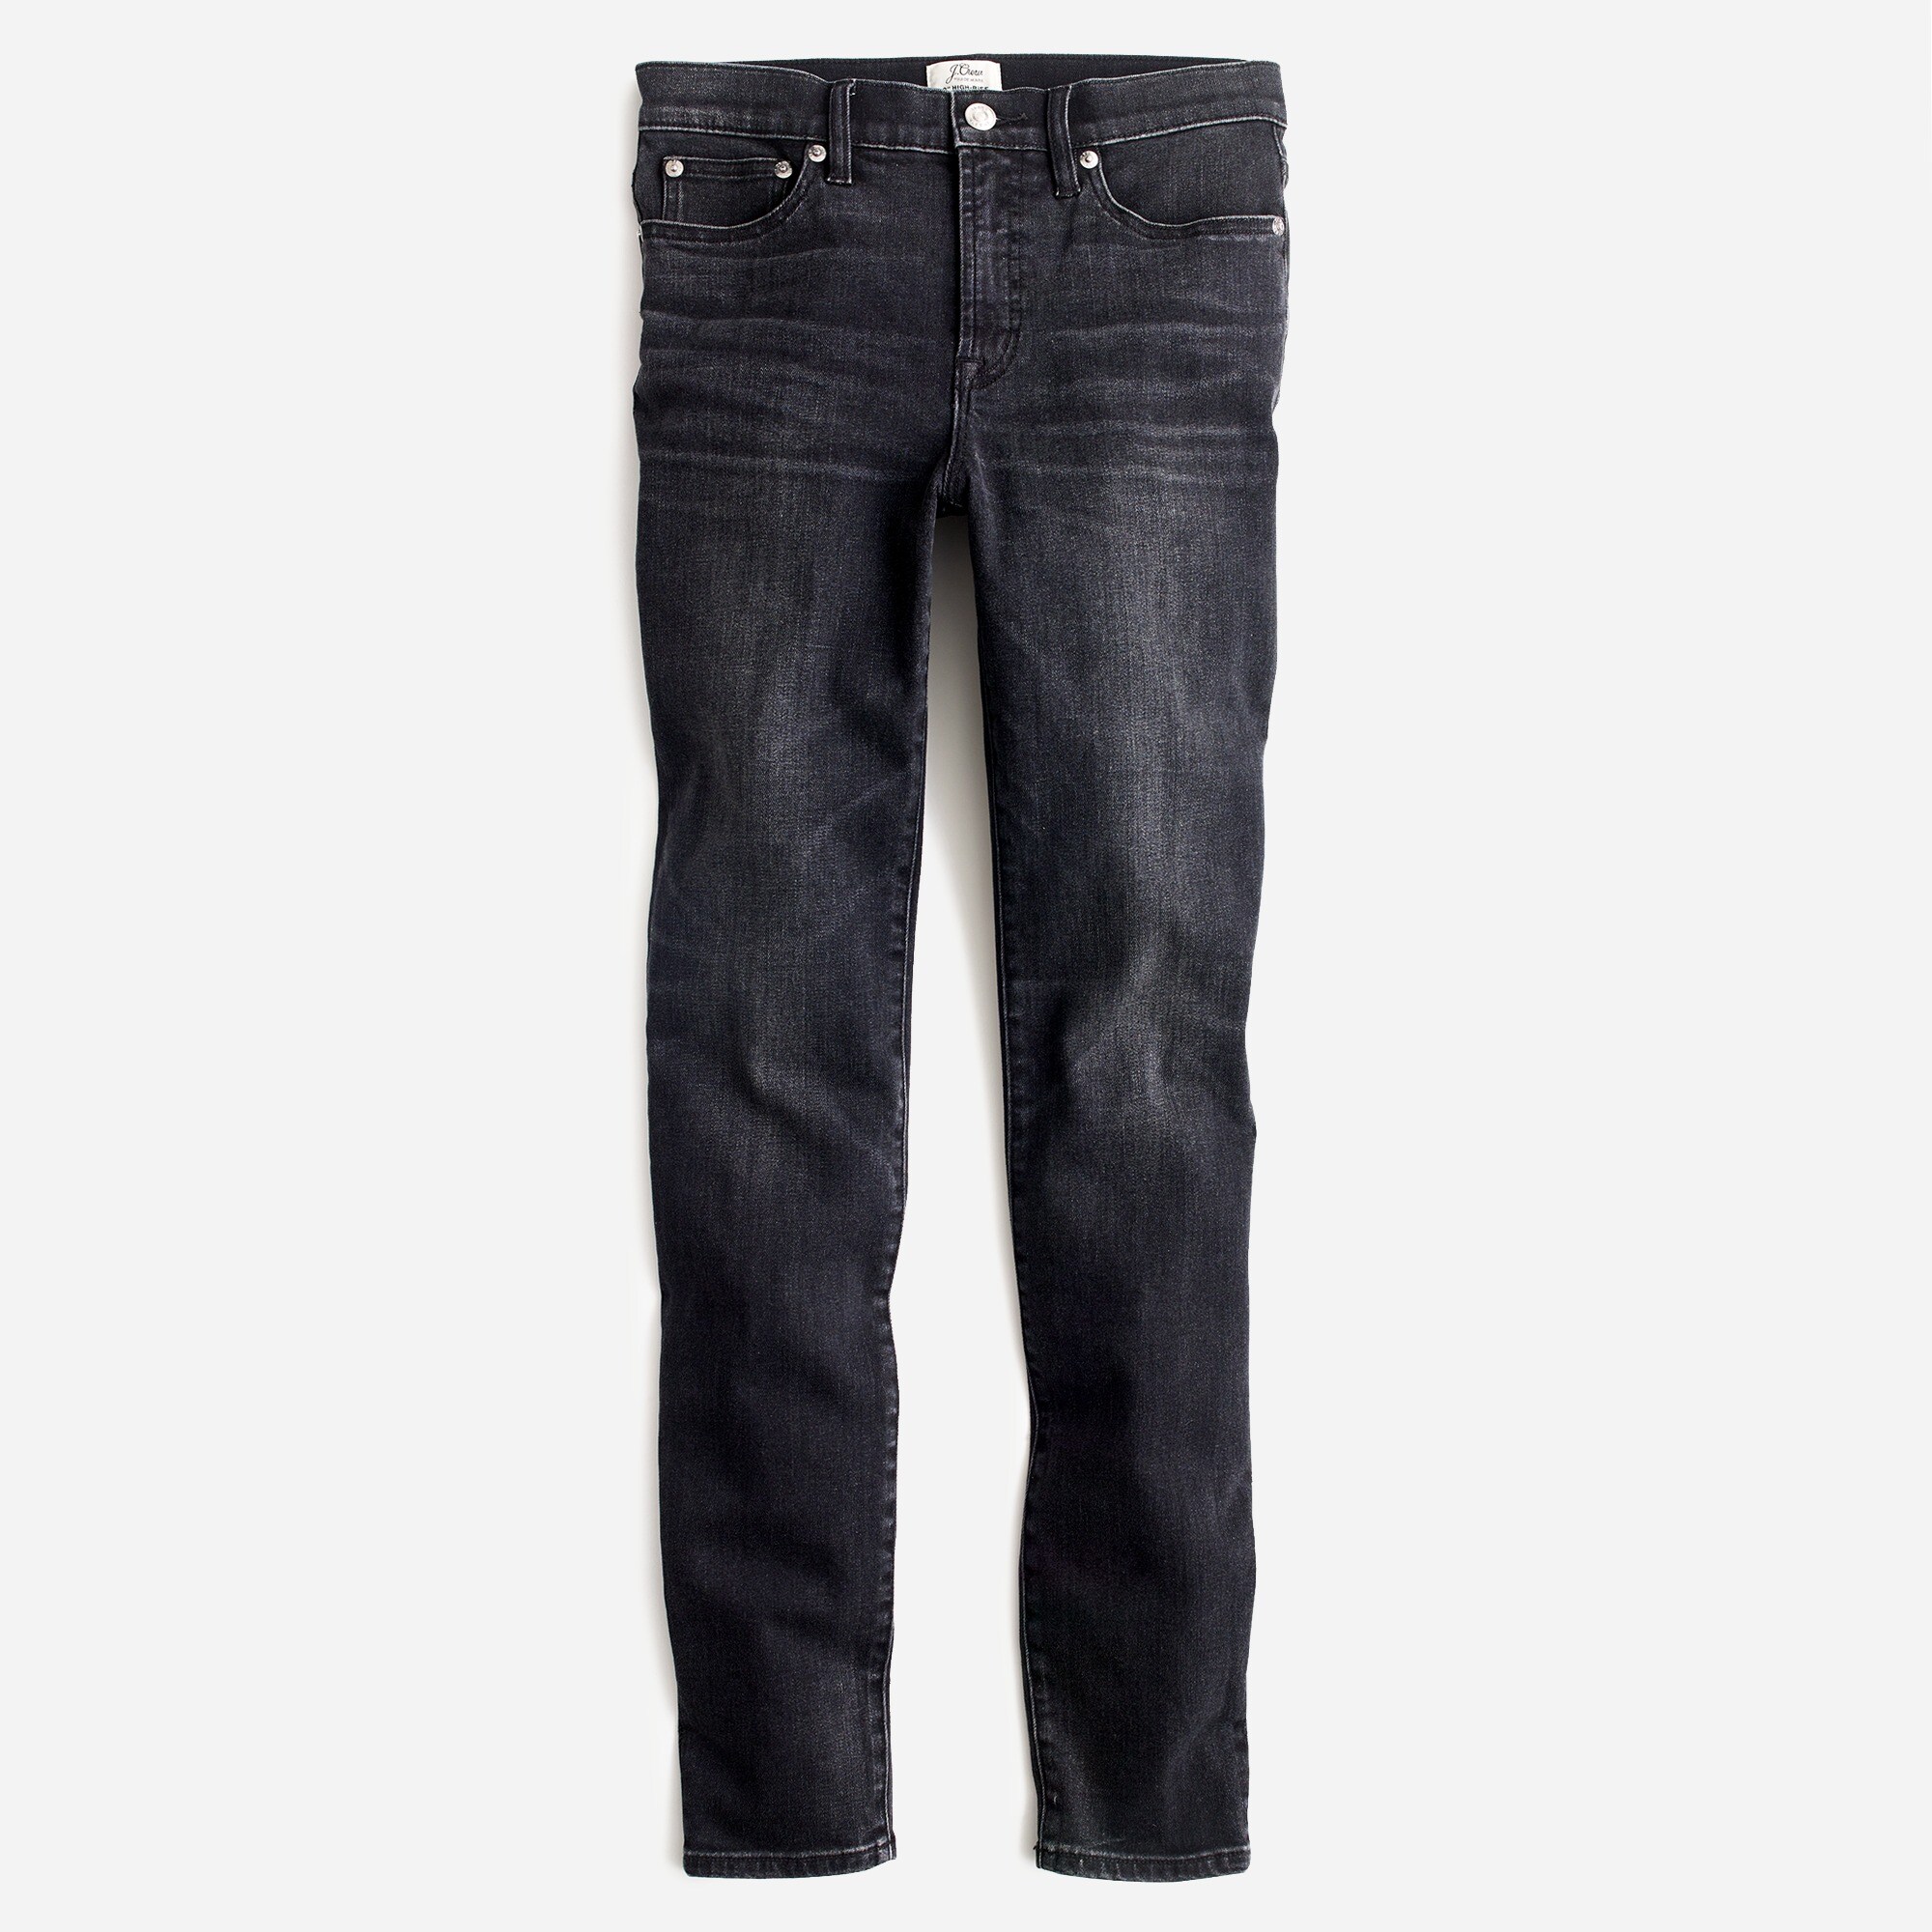  9" high-rise toothpick jean in Charcoal wash